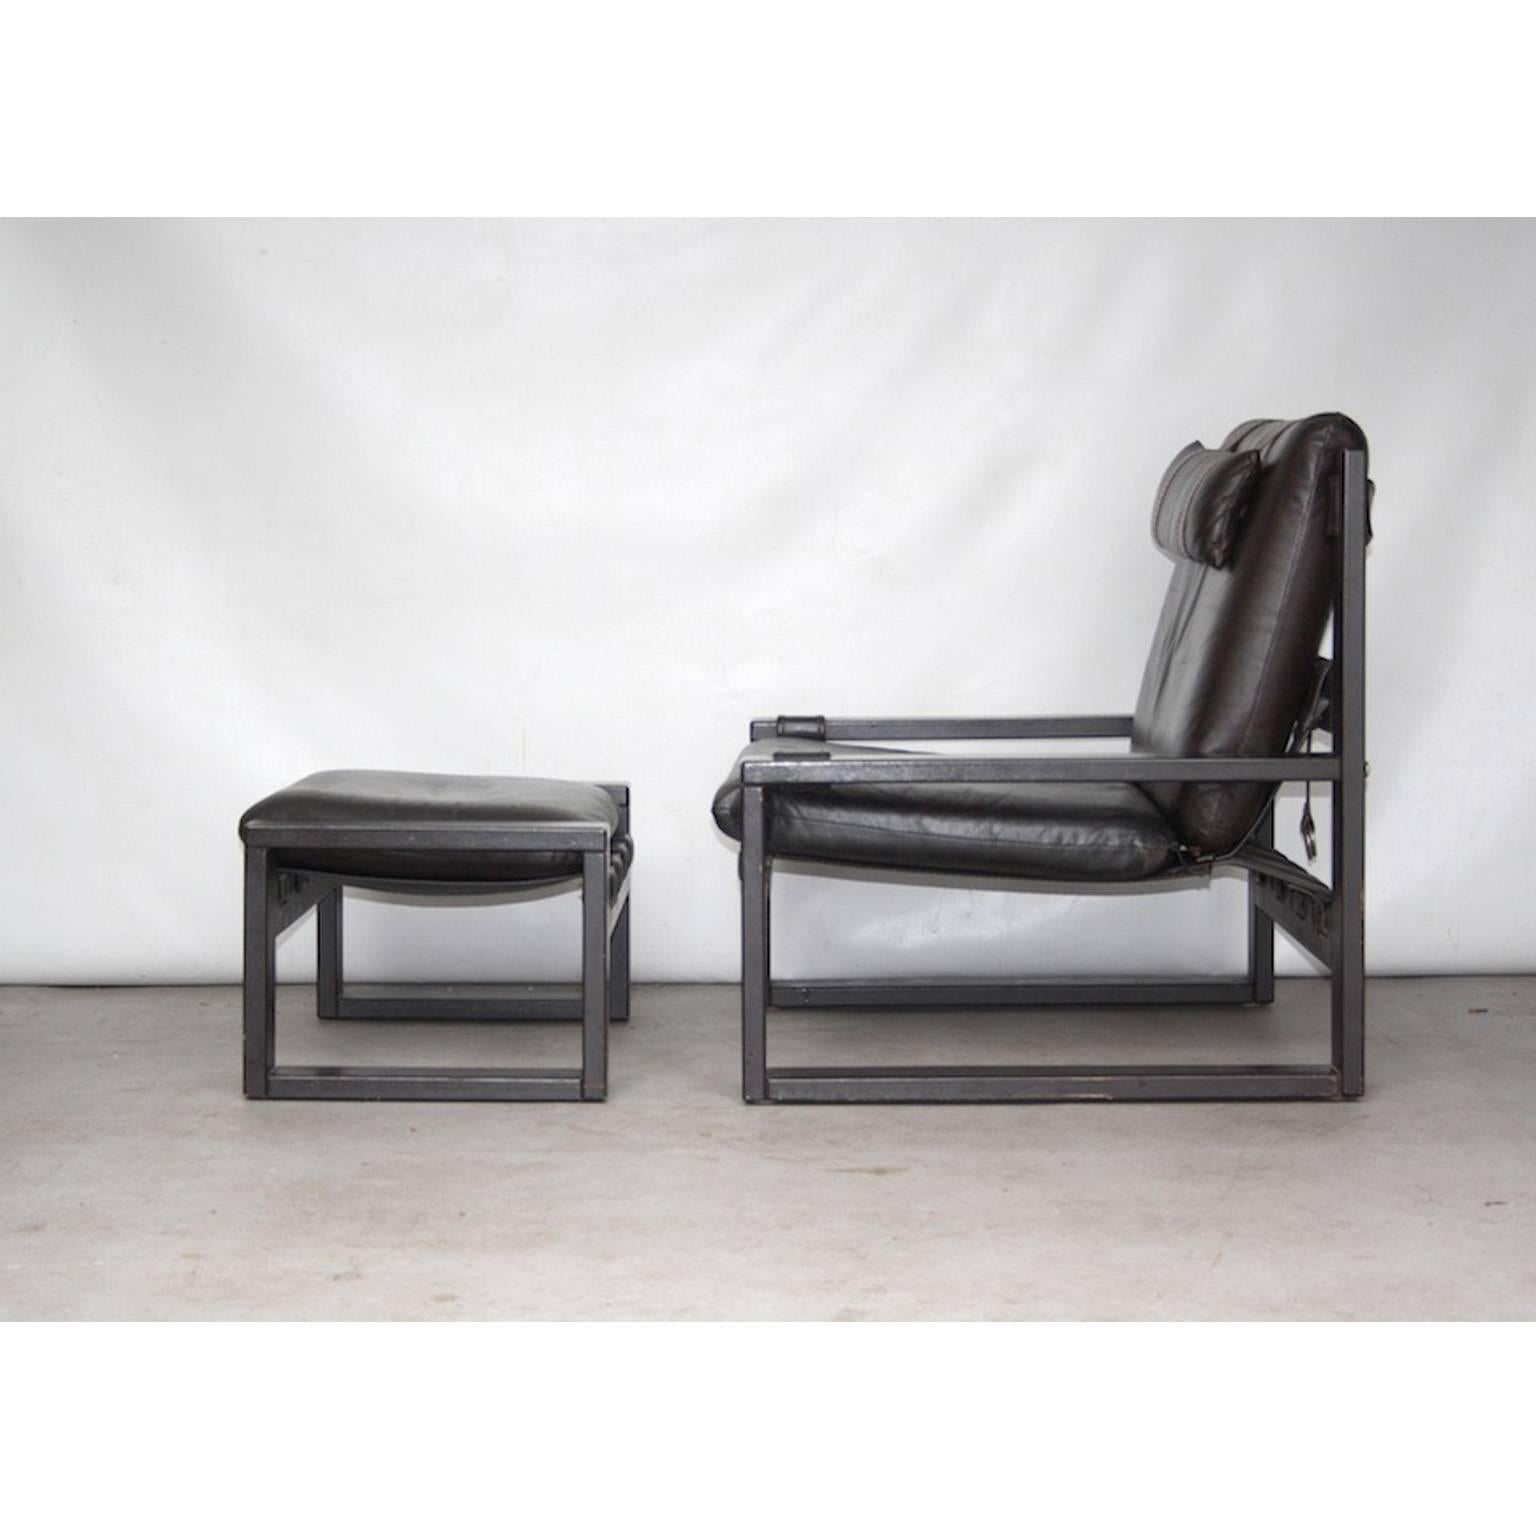 Brutalist Lounge Chair and Ottoman by Sonja Wasseur, Dutch Design 1970s In Good Condition For Sale In Lijnden, Noord-Holland